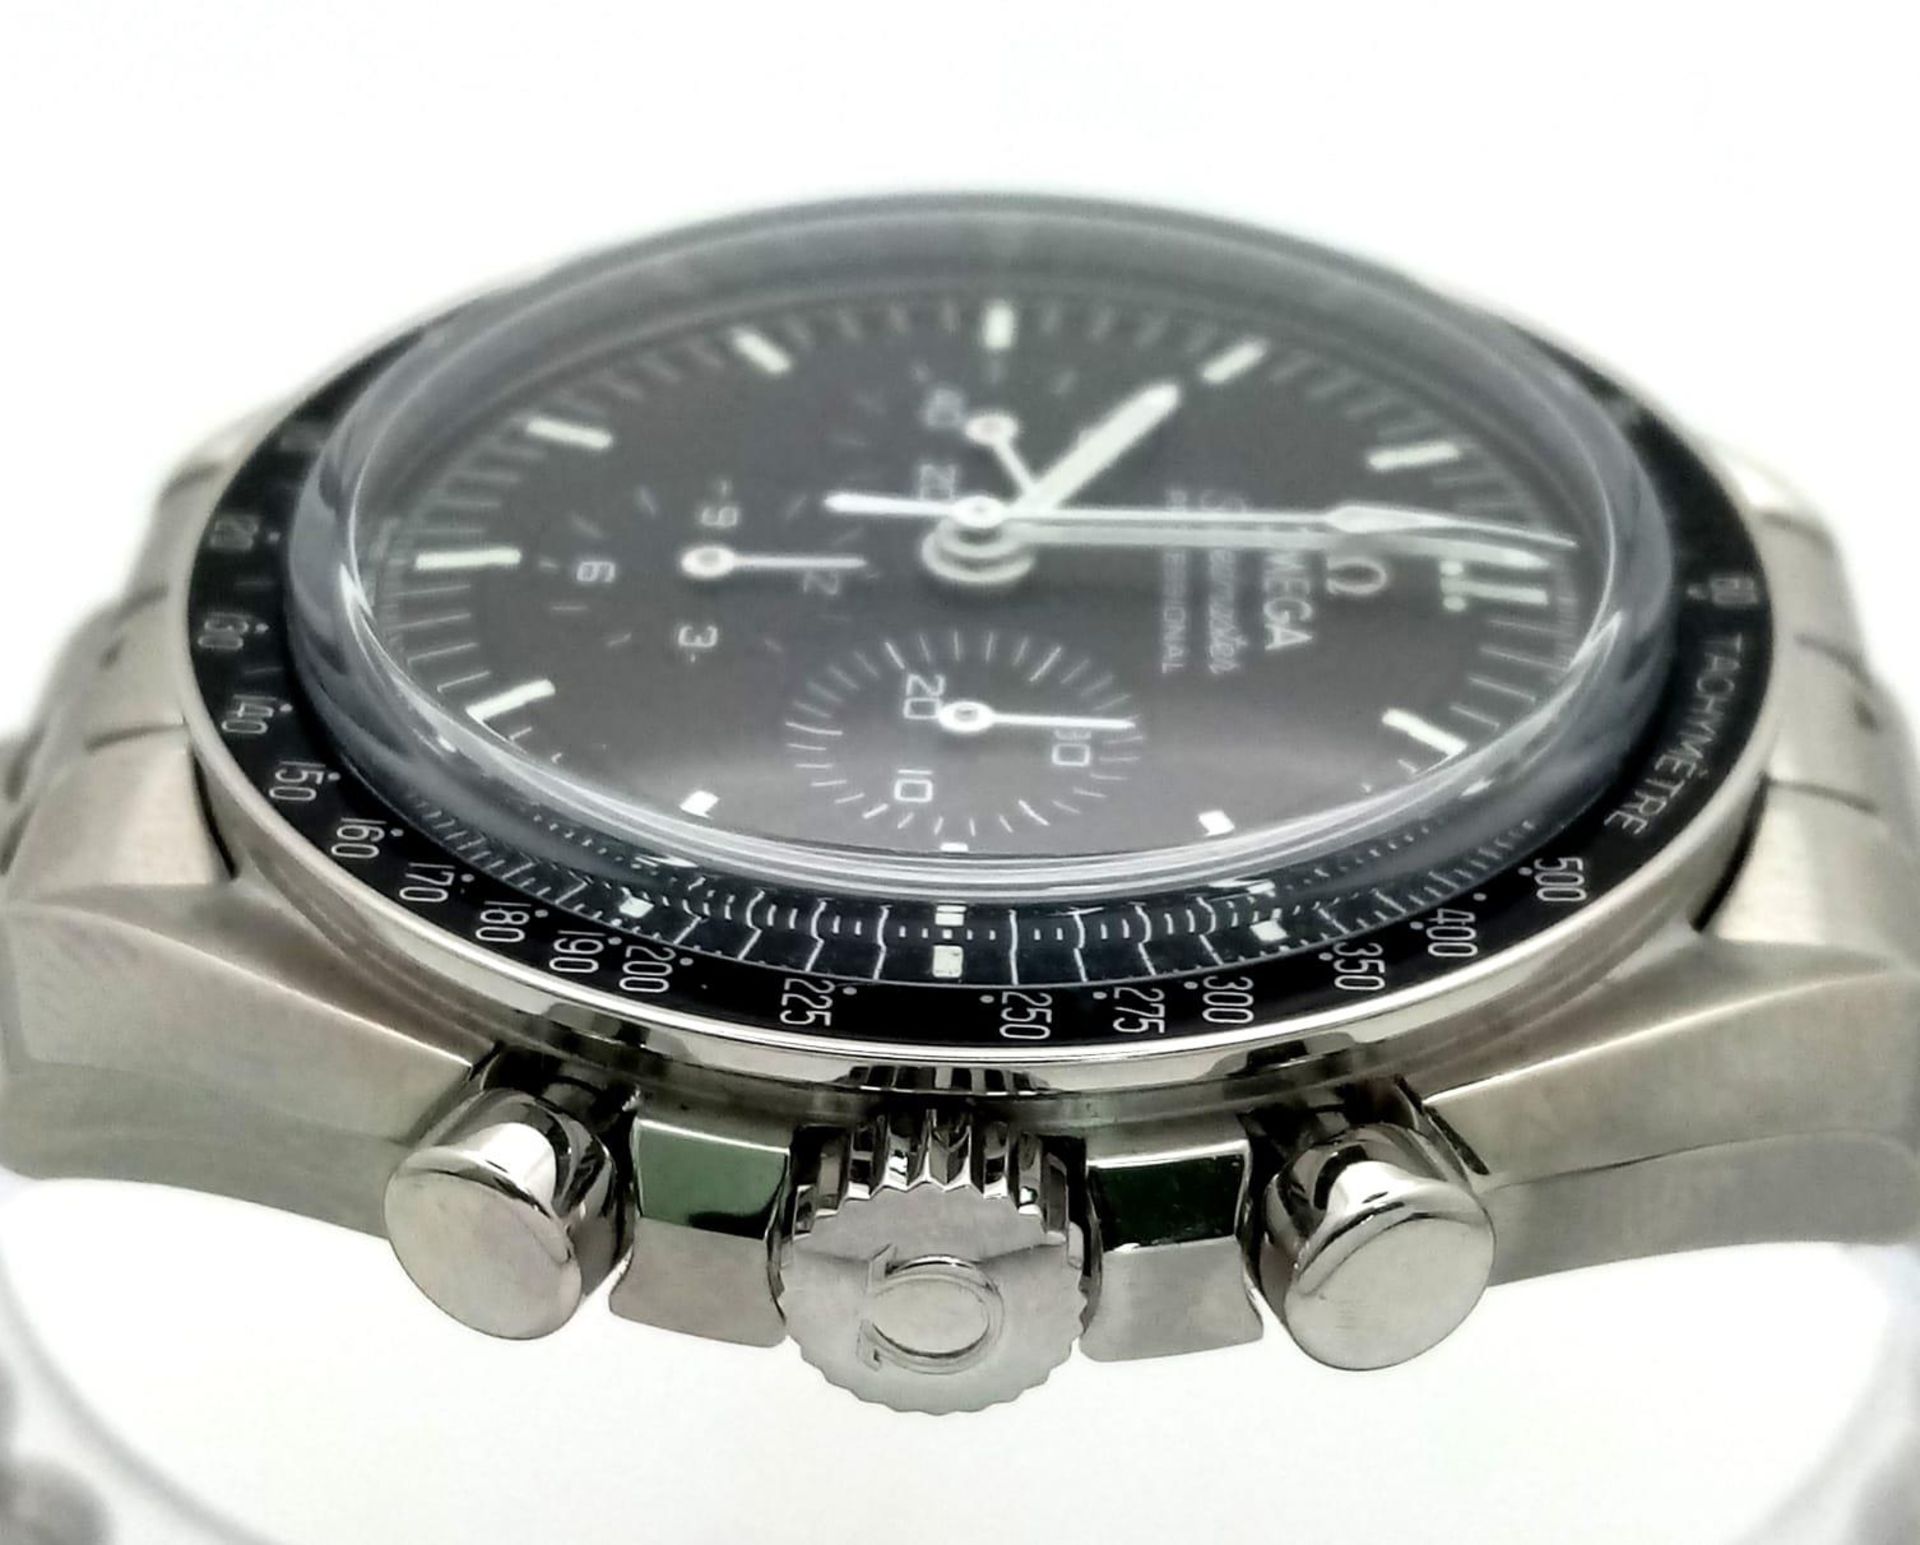 An Omega Speedmaster Moonwatch Chronograph Gents Watch. Stainless steel bracelet and case - 42mm. - Image 7 of 19